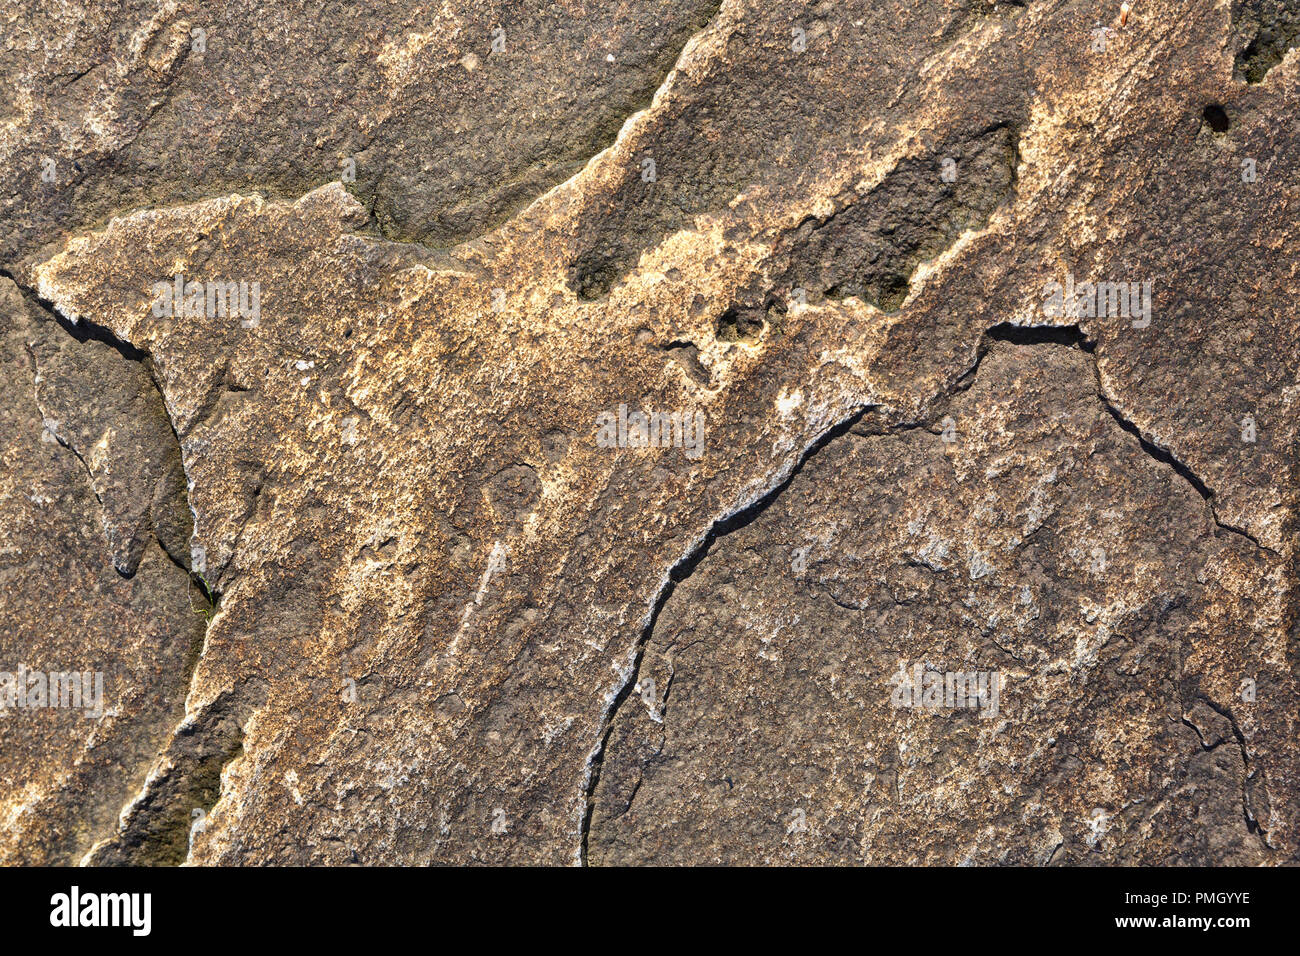 Flat Rock Surface Image & Photo (Free Trial)